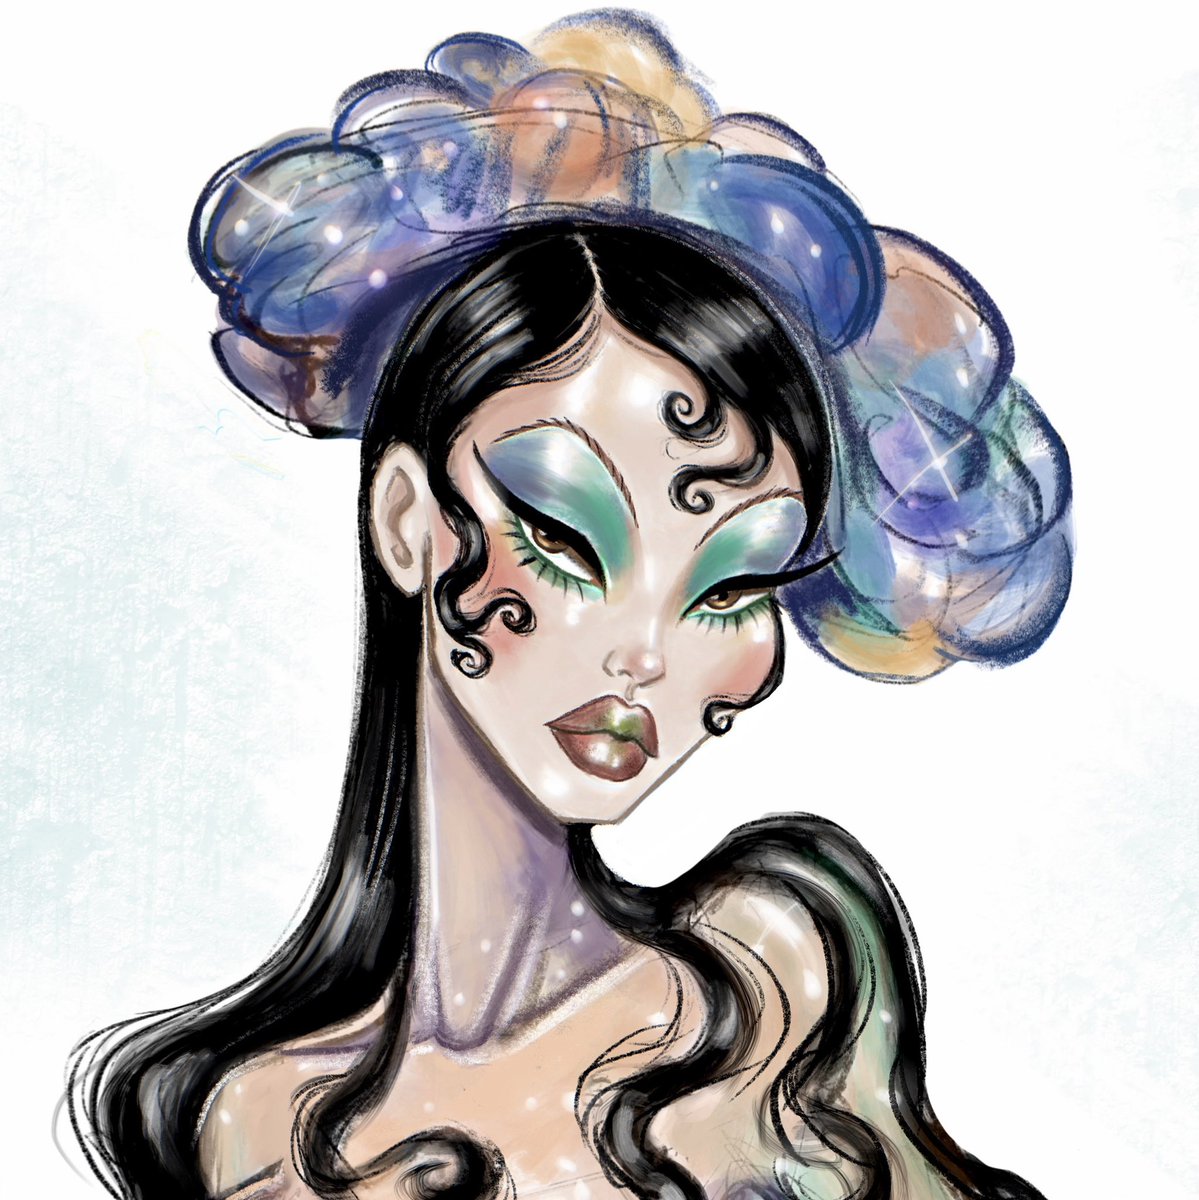 Let’s get into some #MerMay looks shall we?!

MARGIELA MERMAID 🧜🏻‍♀️ 

Inspired by the iconic Artisanal 2024 Haute Couture collection 
#MargielaMermaid #Mermaid #MaisonMargiela #JohnGalliano #PatMcgrath #GlassSkin #HauteCouture #Mermay2024 @Margiela @patmcgrathreal